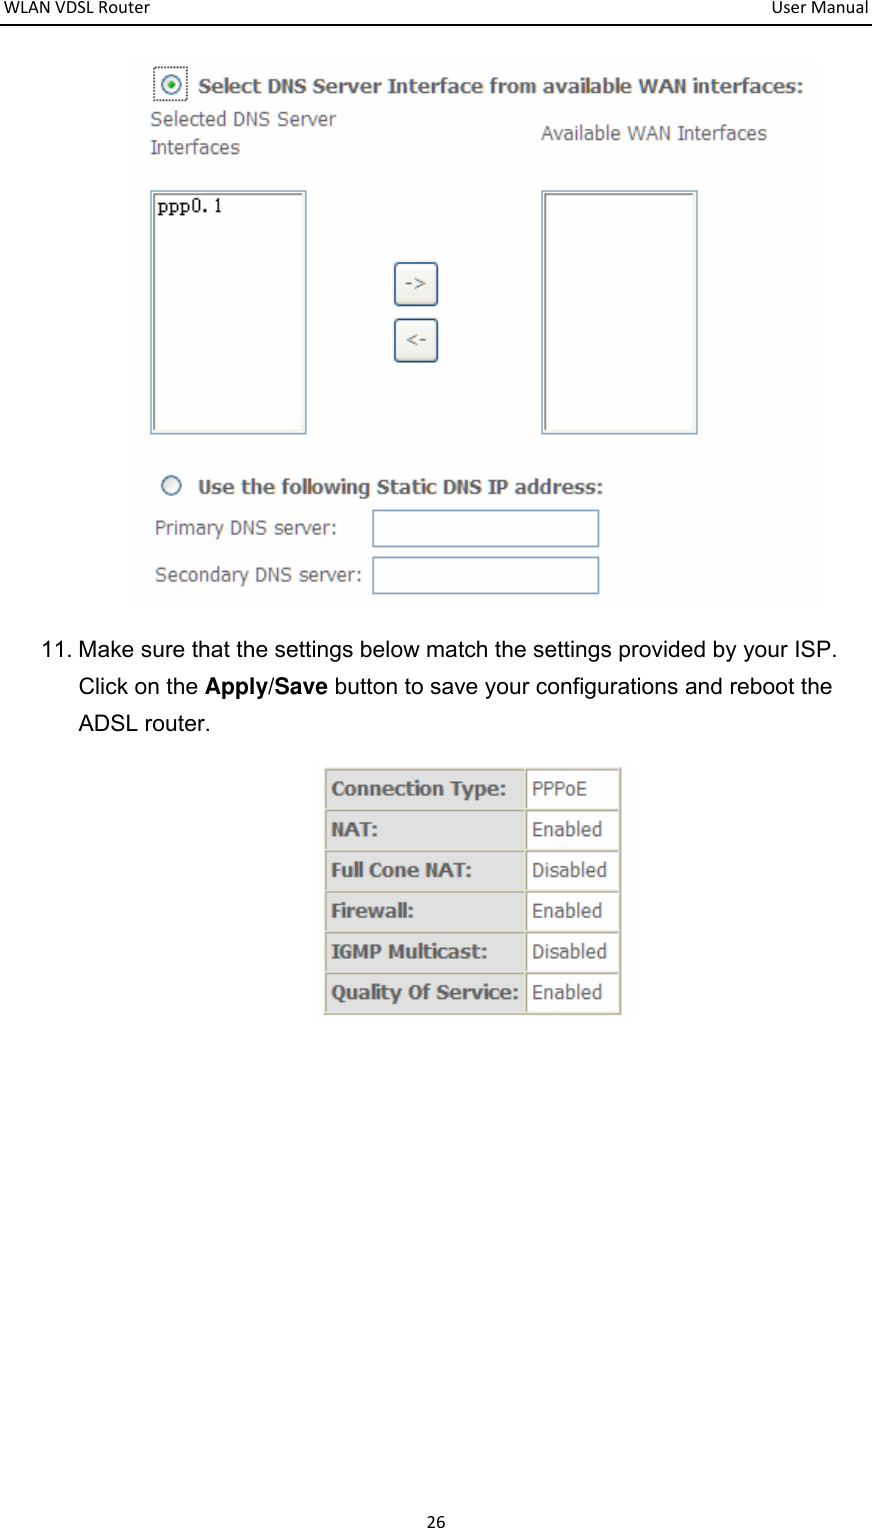 WLANVDSLRouter  UserManual26 11. Make sure that the settings below match the settings provided by your ISP. Click on the Apply/Save button to save your configurations and reboot the ADSL router.         